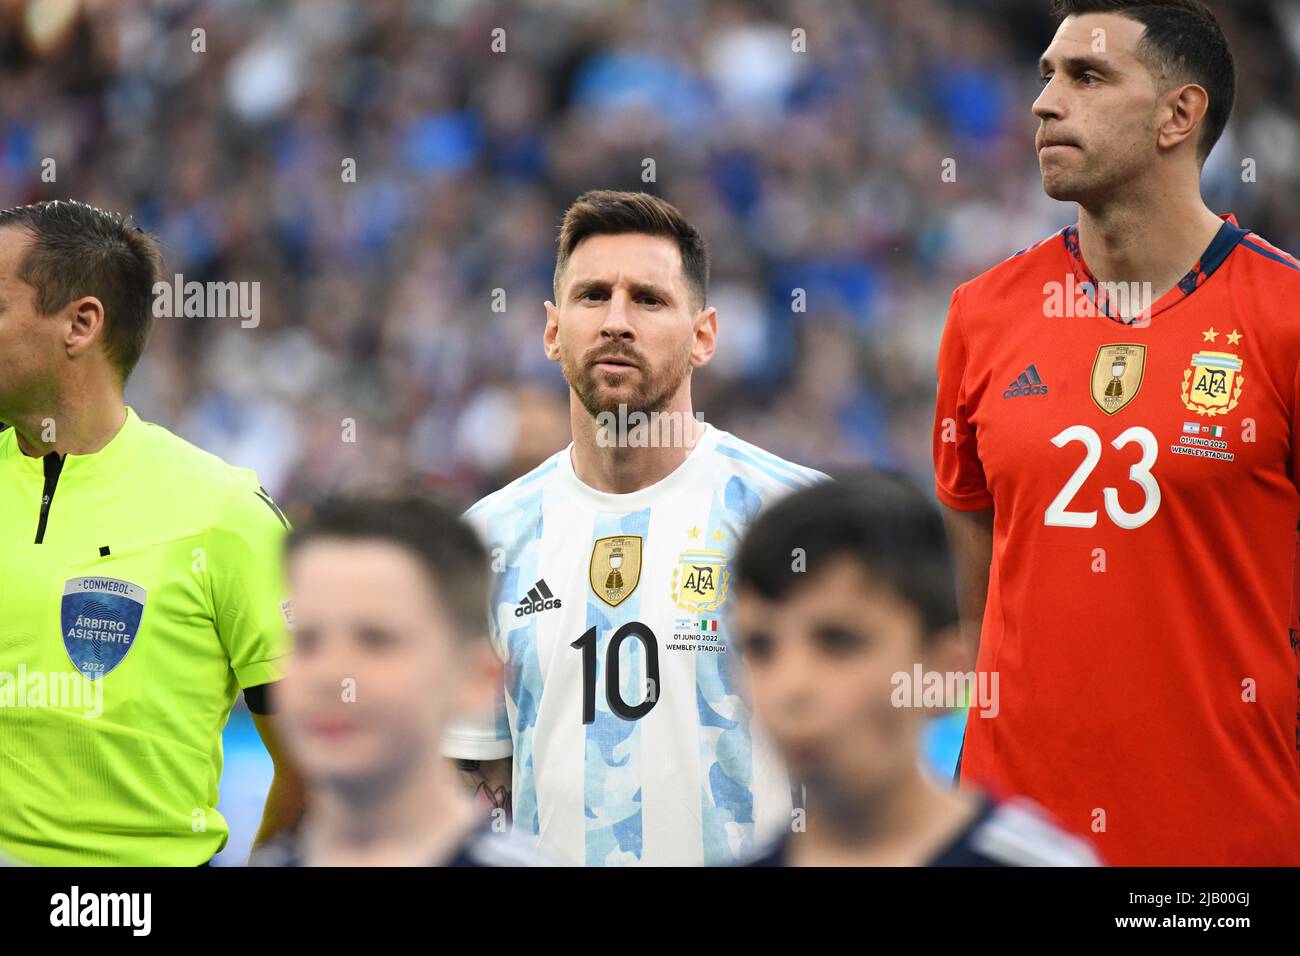 WEMBLEY, ENGLAND - JUNE 1: Messi of Argentina looks on before the Finalissima match between Italy and Argentina at Wembley Stadium on June 1, 2022 in Wembley, England. (Photo by Sara Aribó/PxImages) Credit: Px Images/Alamy Live News Stock Photo